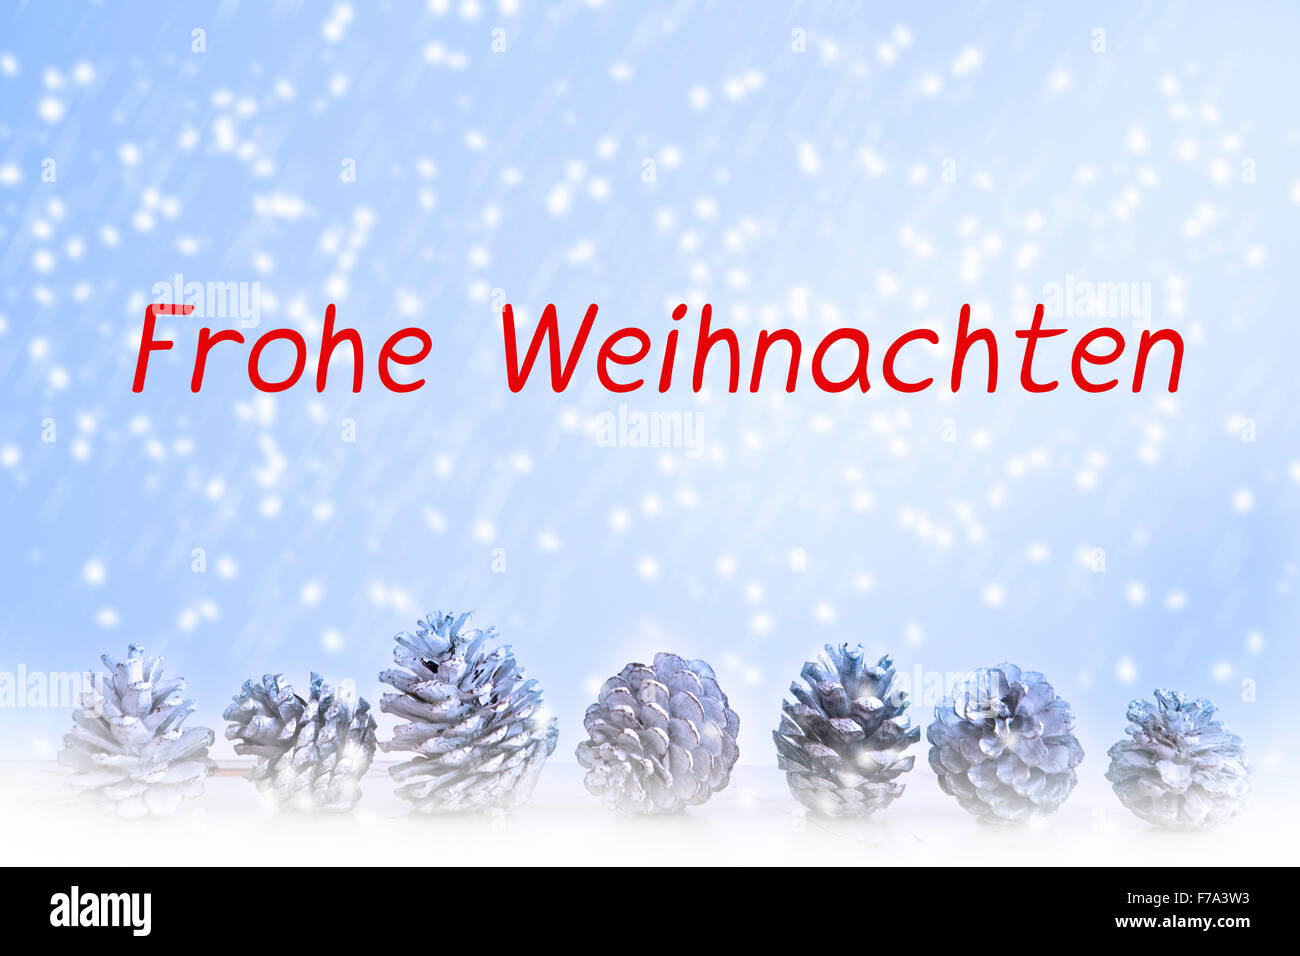 german 'Frohe Weihnachten' written on blue background with snowflakes and pinecones Stock Photo